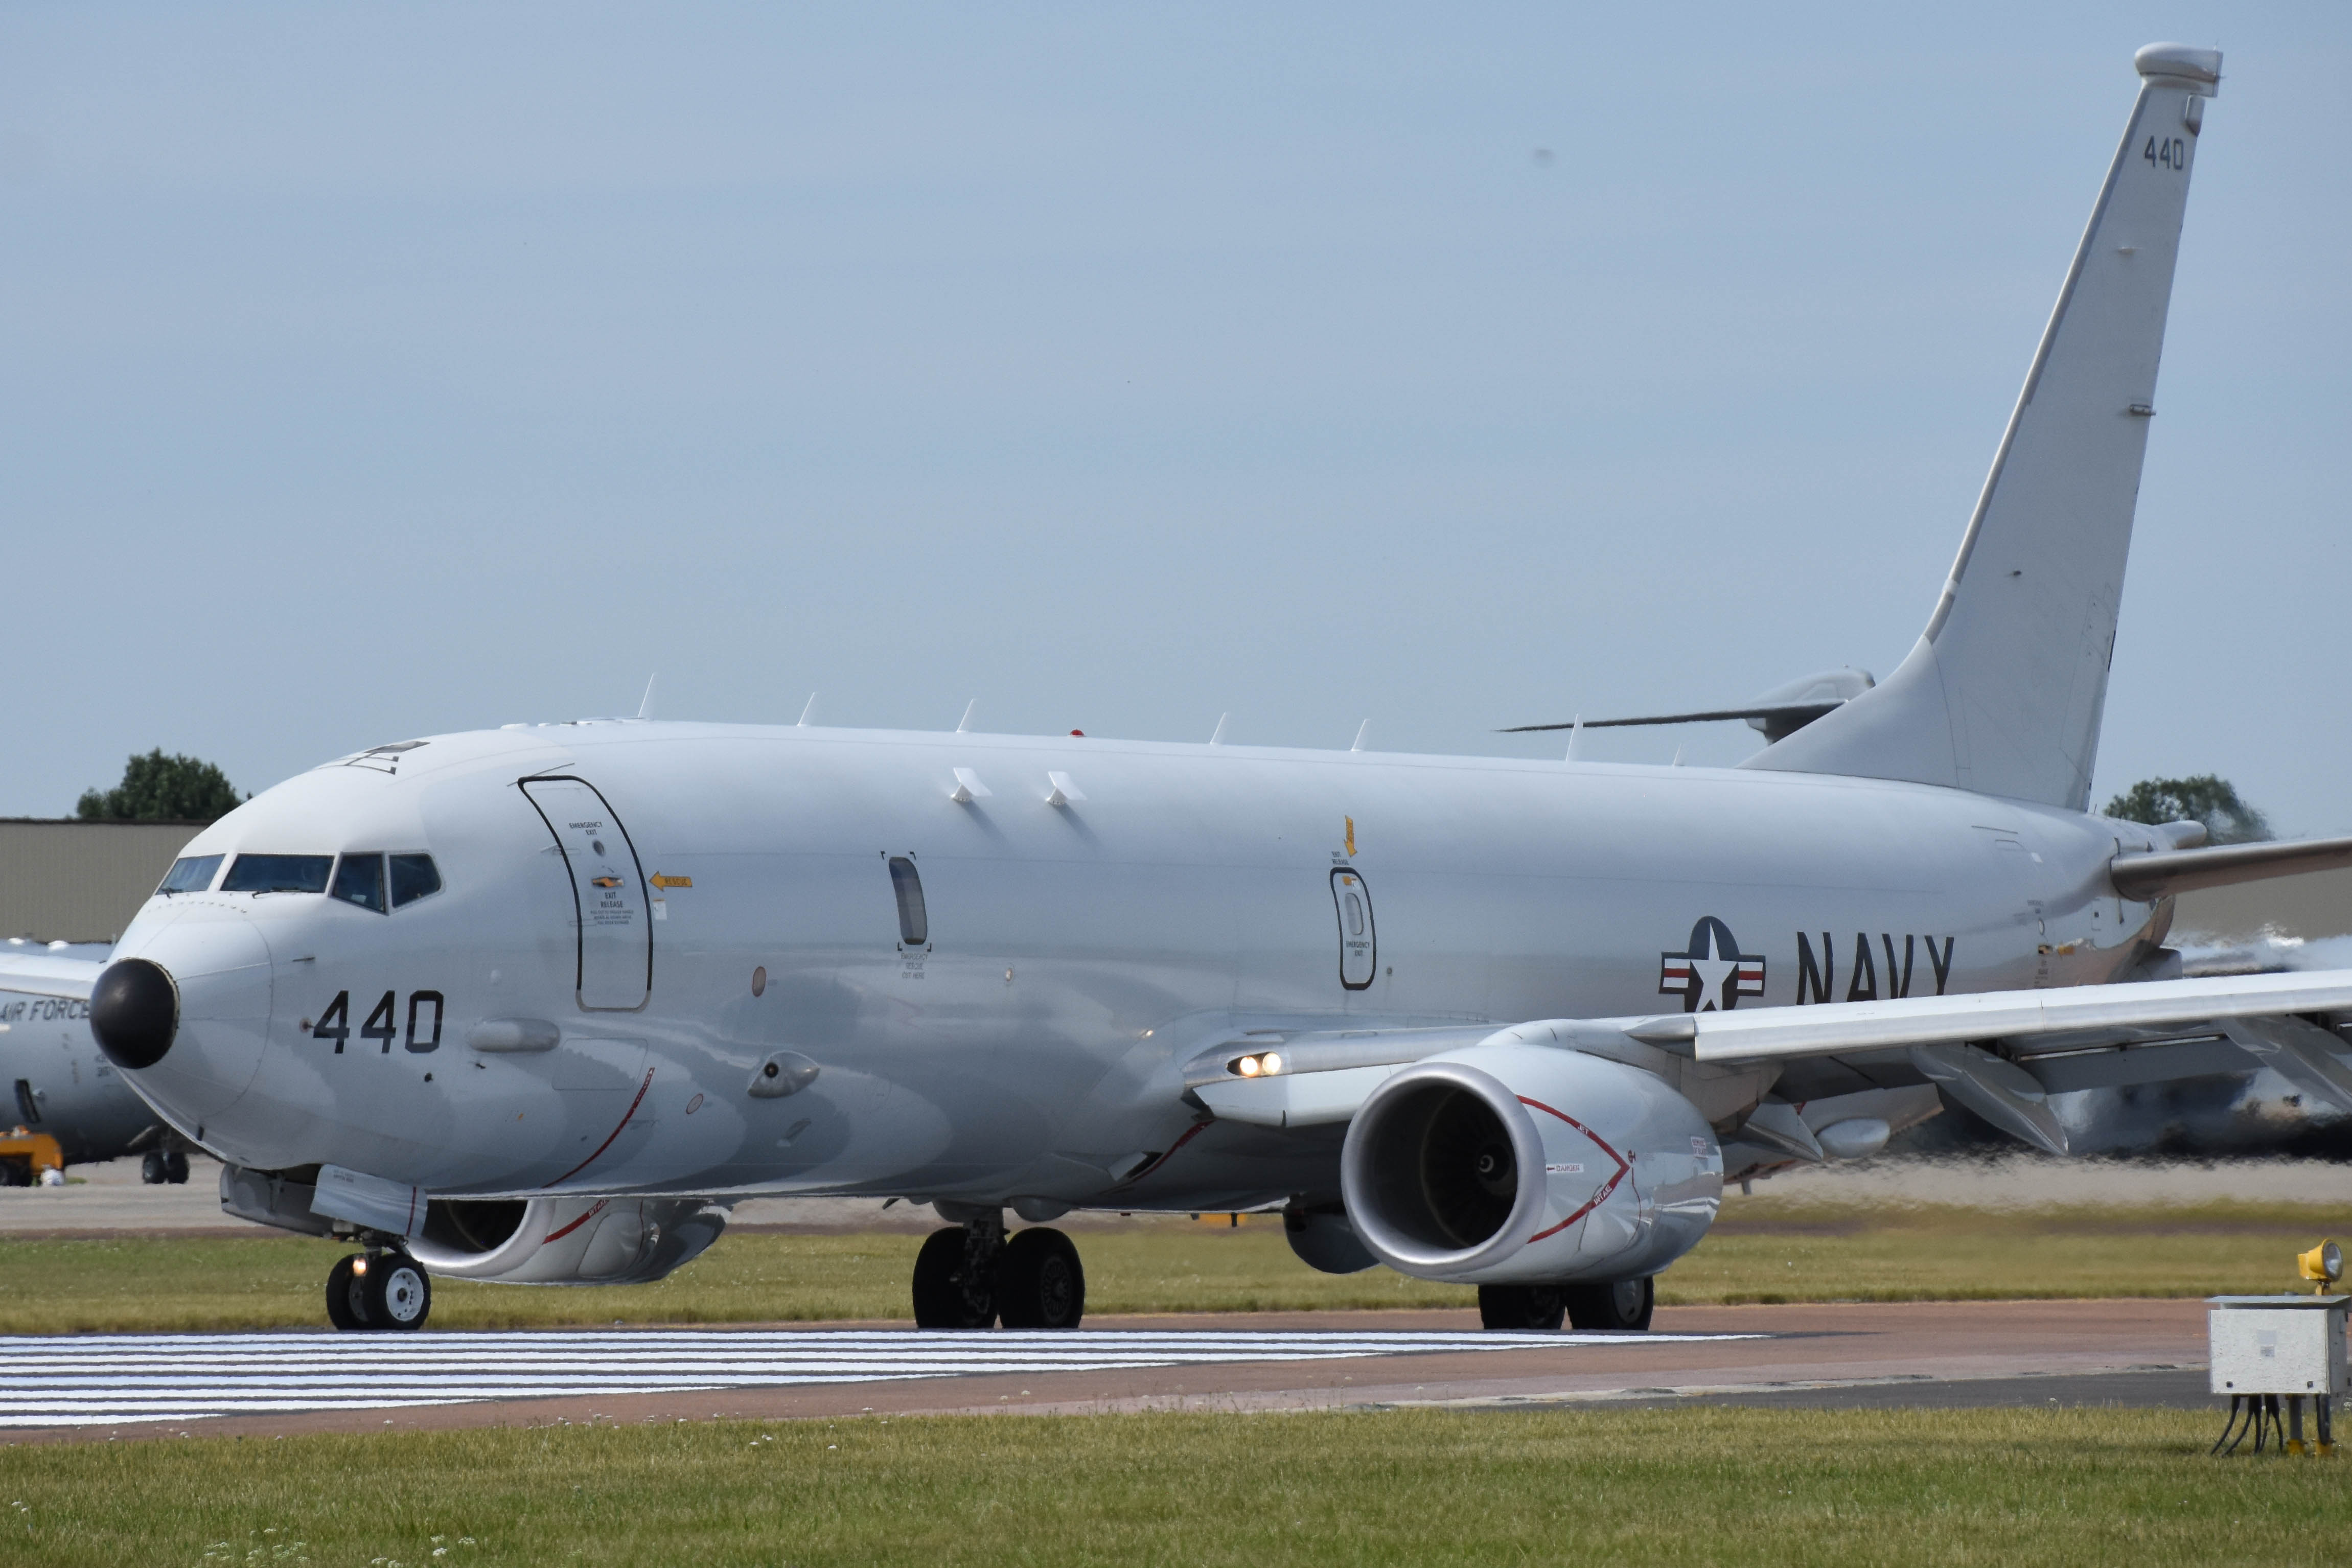 168440/168440 USN - United States Navy Boeing P-8A Poseidon Photo by colinw - AVSpotters.com